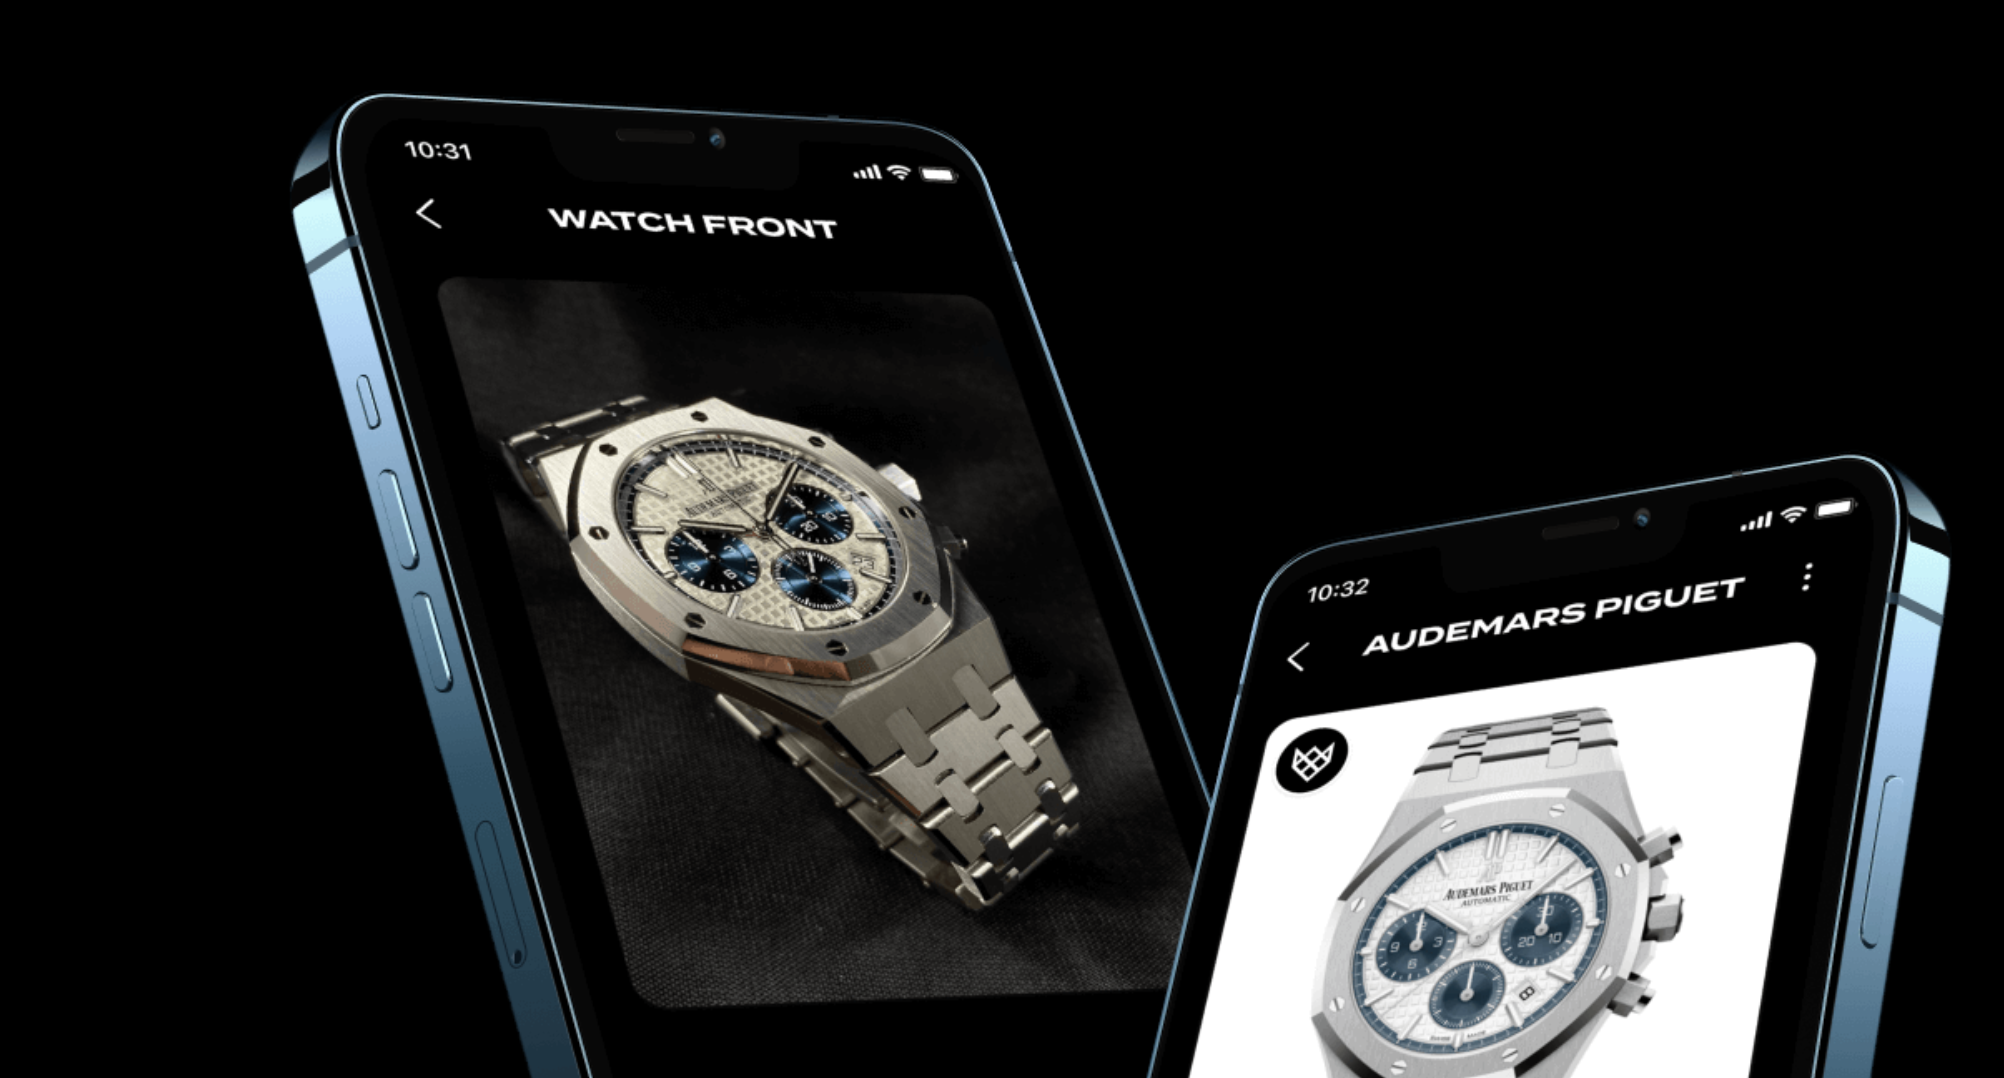 EXCLUSIVE - Protection For The Unexpected: Collectibles Insurer Wax Partners With Luxury Bazaar To Allow People To Collateralize Luxury Watches